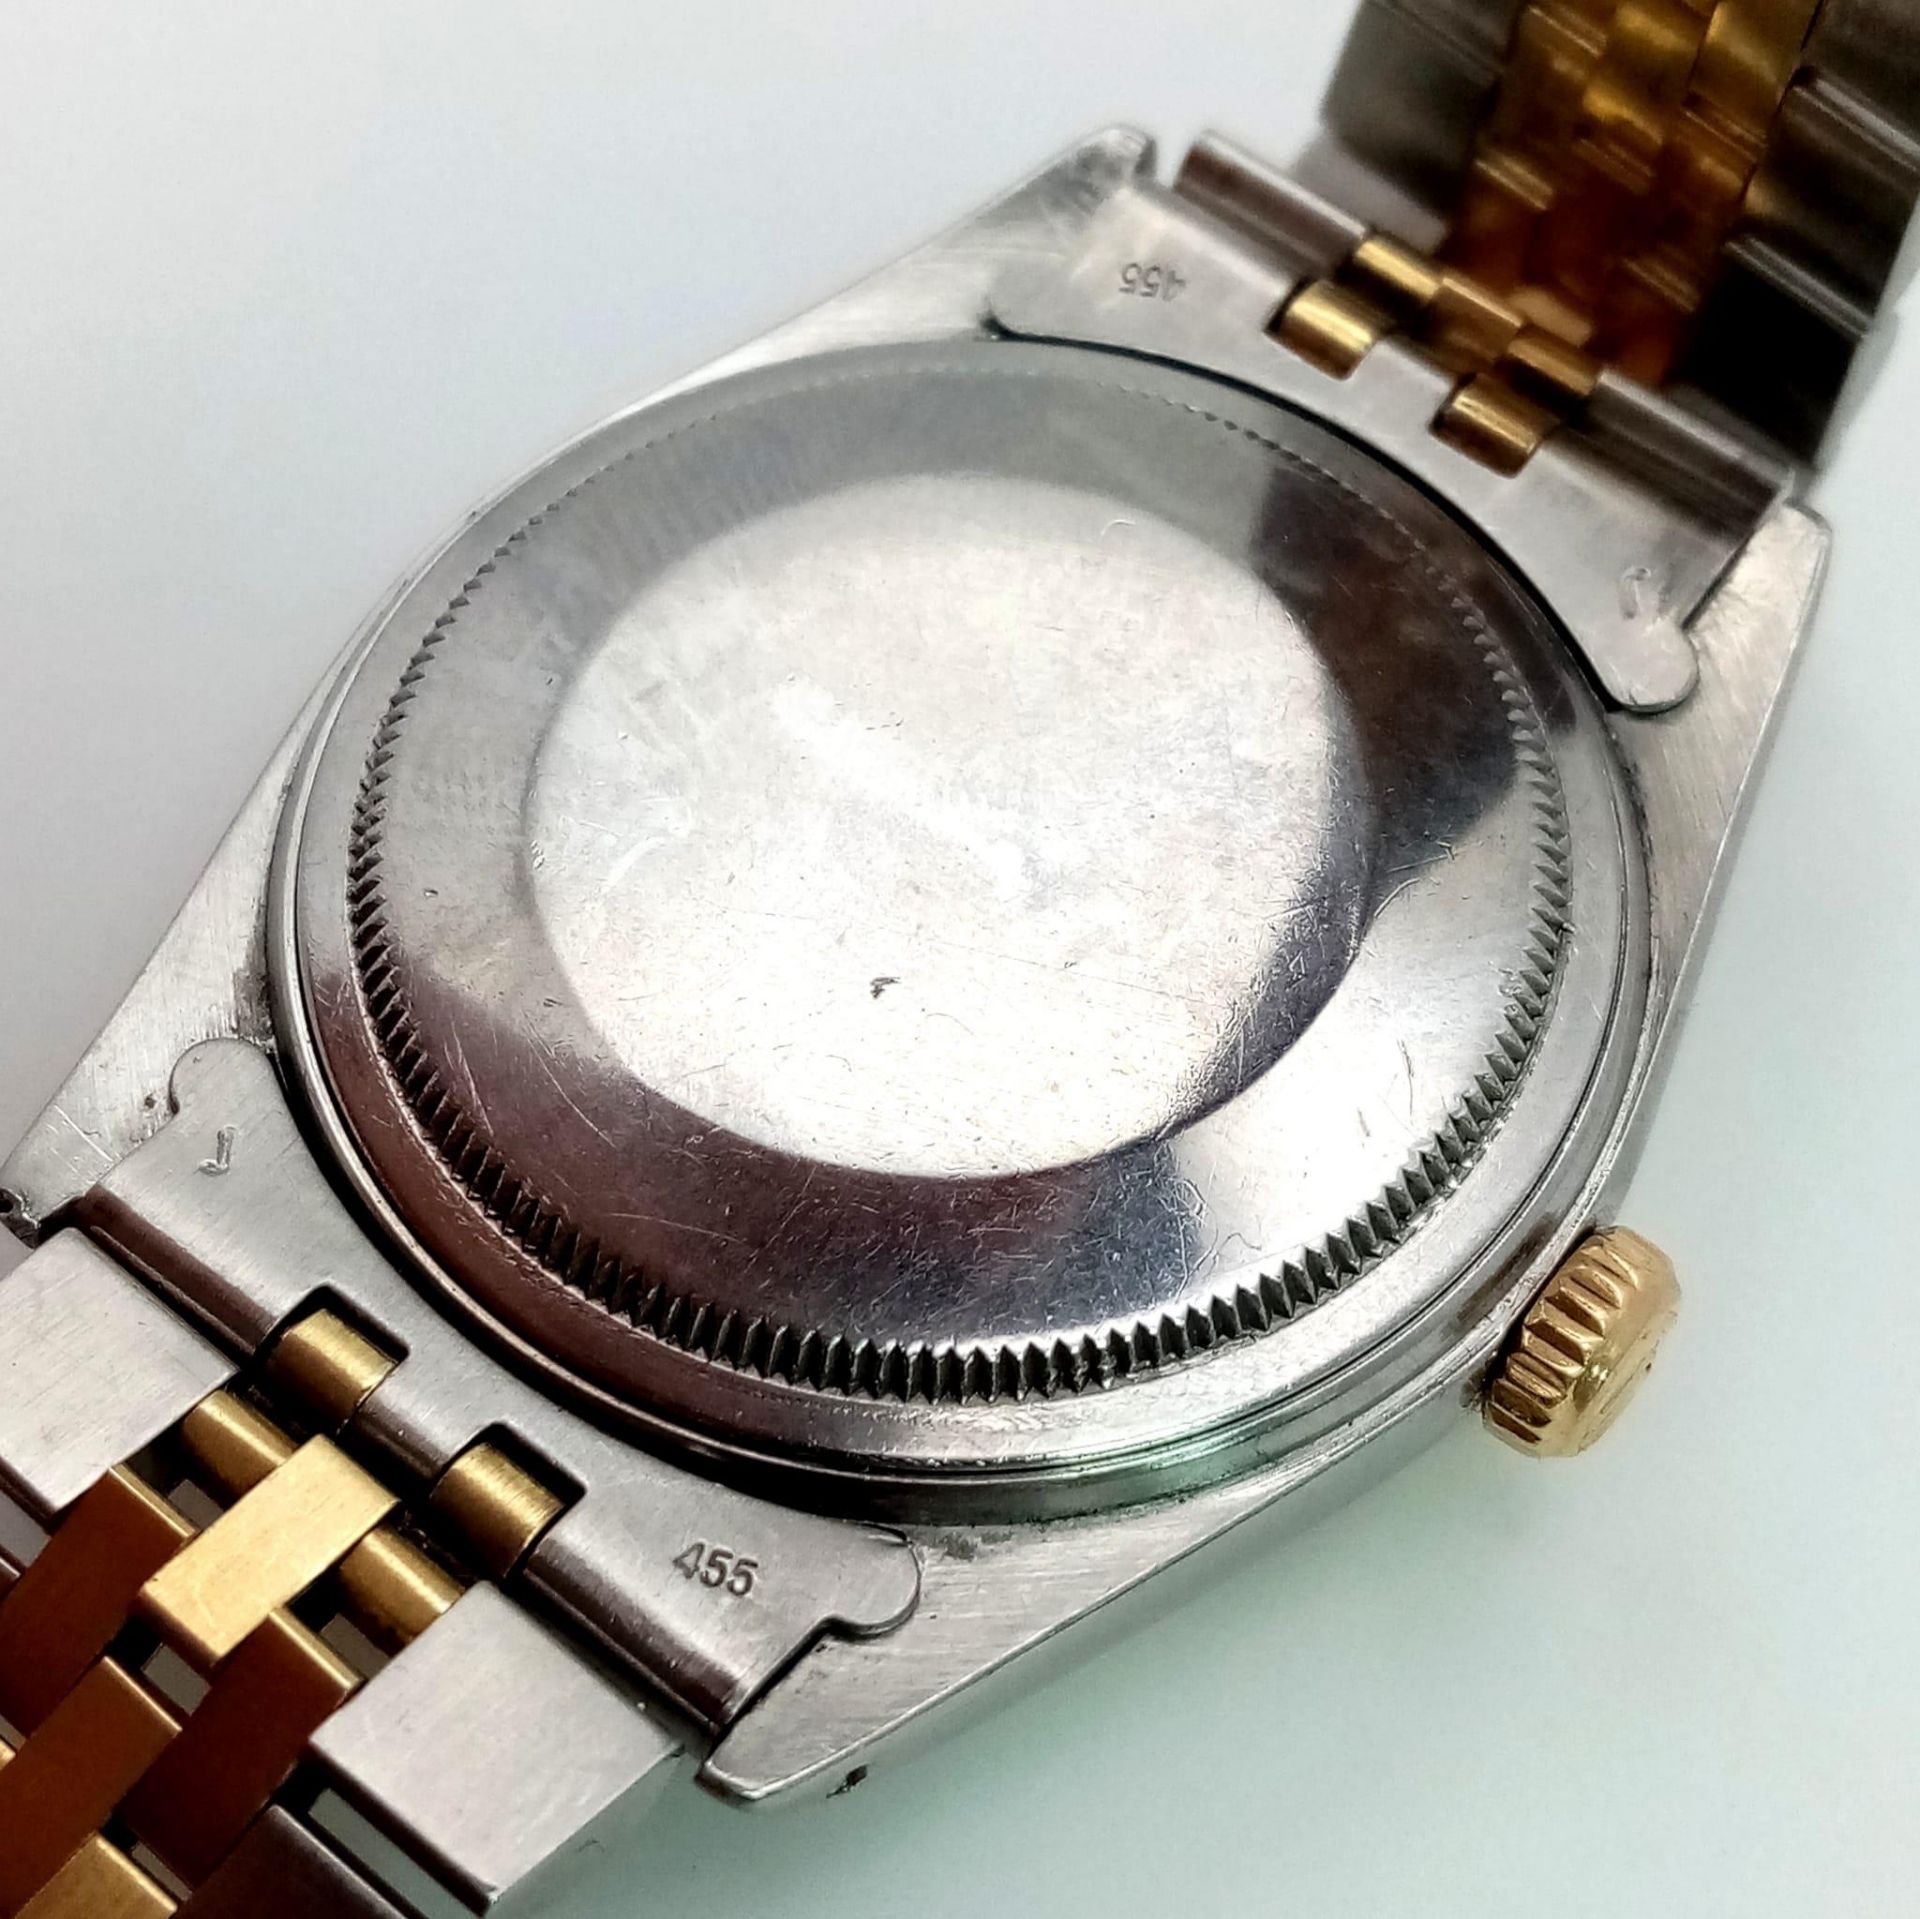 A ROLEX OYSTER PERPETUAL DATEJUST IN BI-METAL WITH GOLDTONE DIAL IN ORIGINAL BOX . 36mm - Image 6 of 10